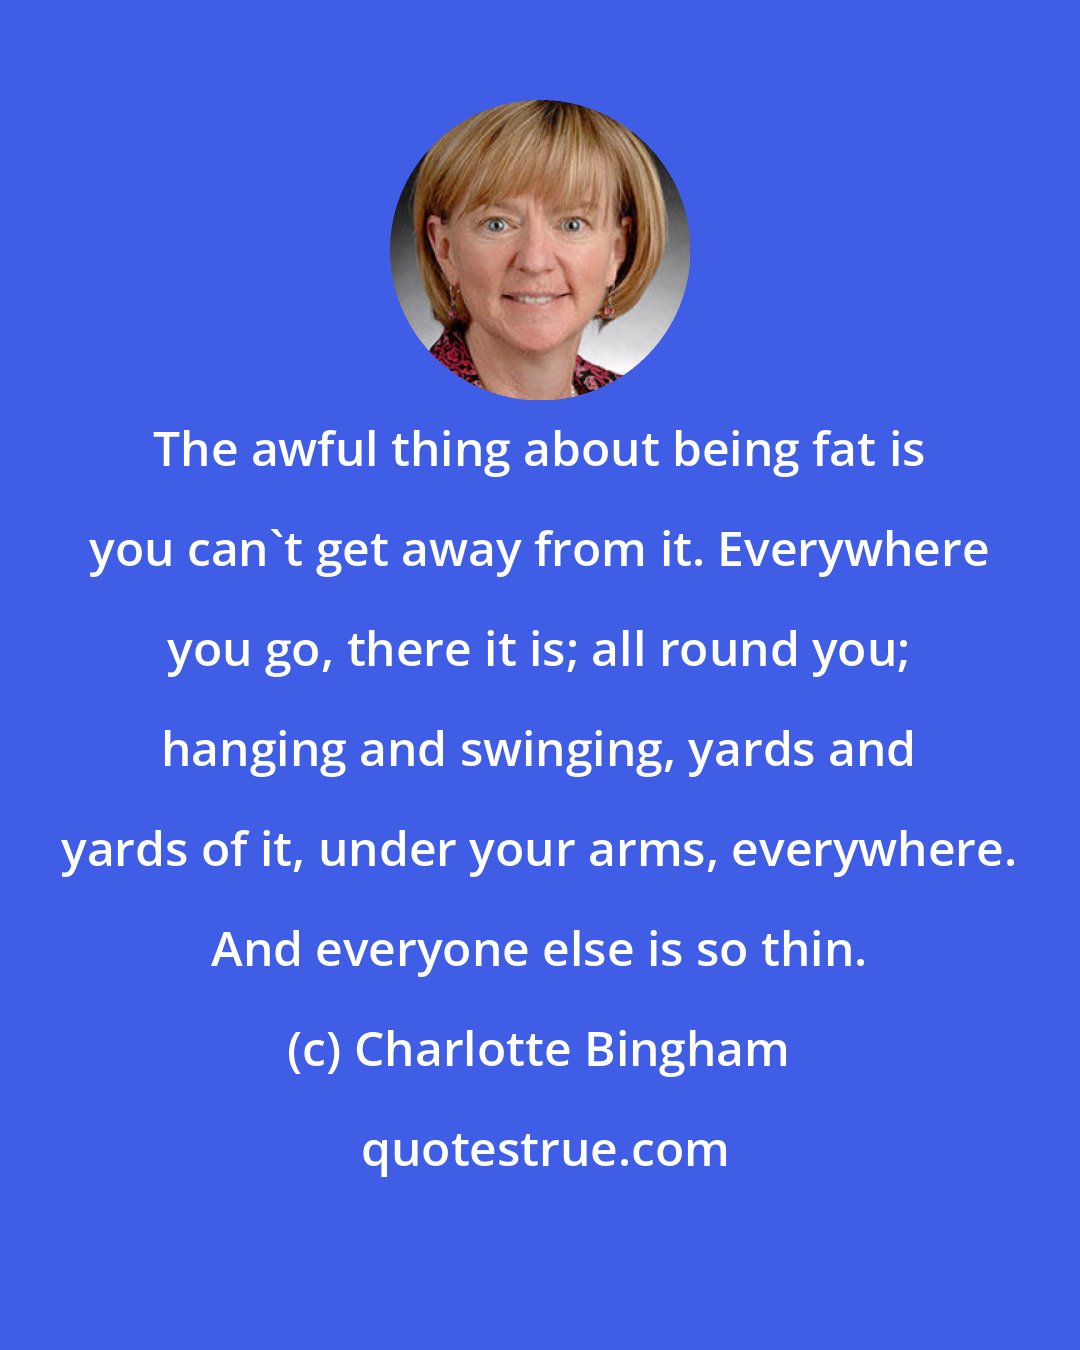 Charlotte Bingham: The awful thing about being fat is you can't get away from it. Everywhere you go, there it is; all round you; hanging and swinging, yards and yards of it, under your arms, everywhere. And everyone else is so thin.